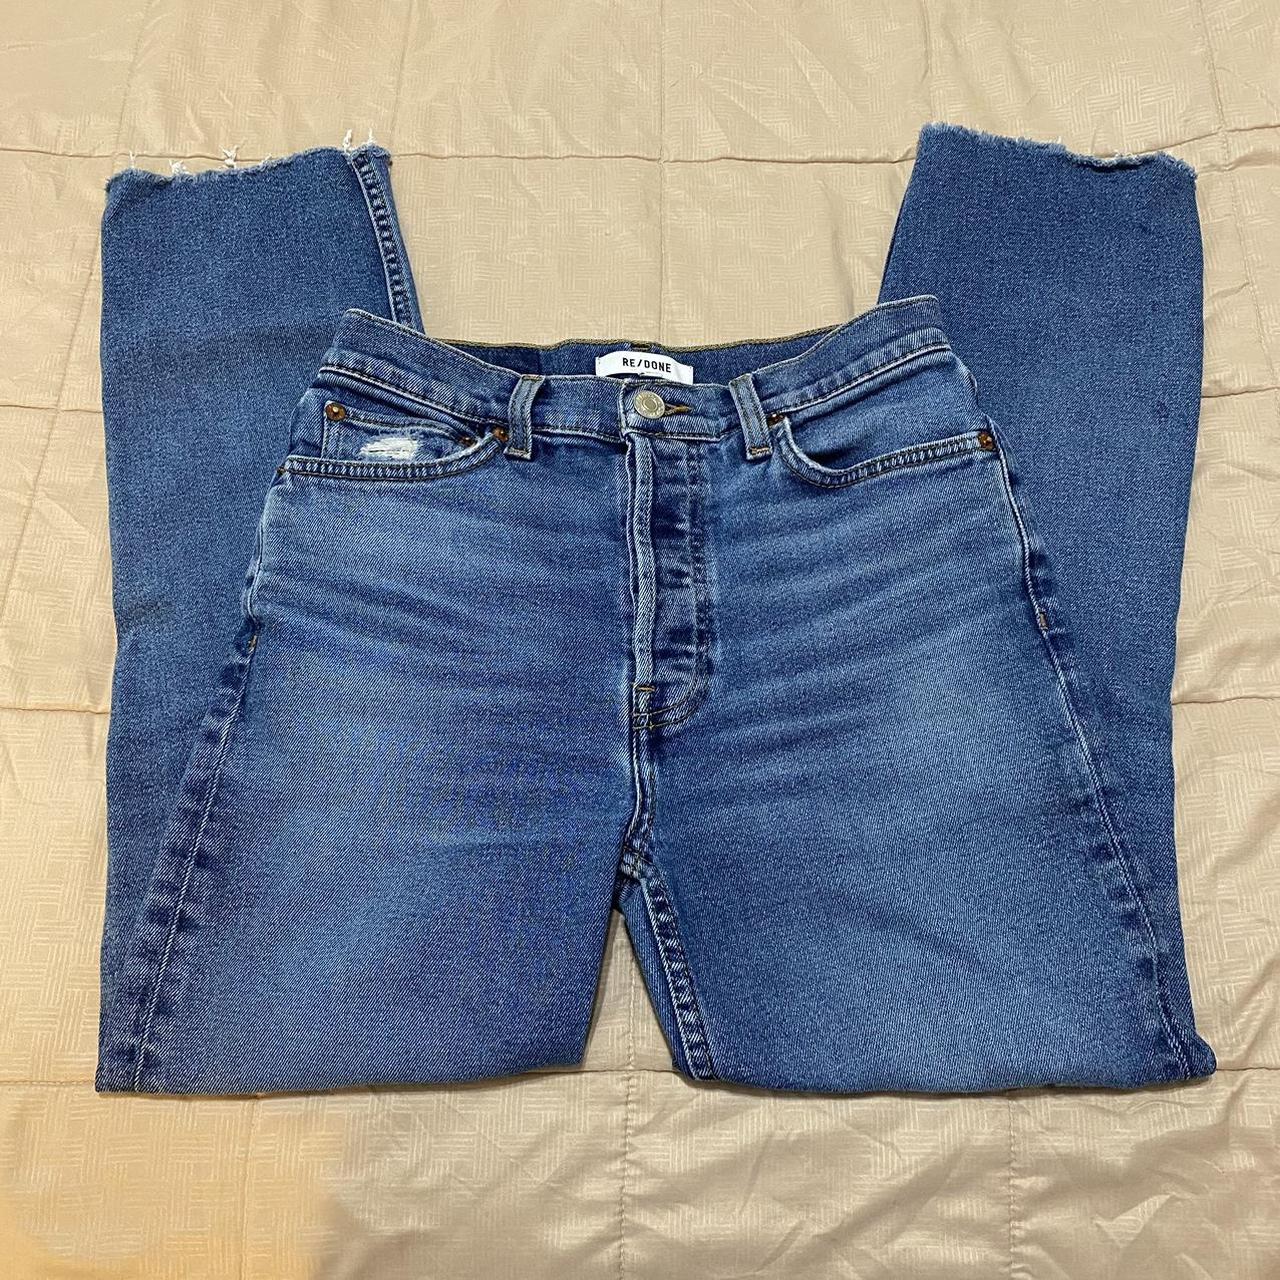 RE/DONE Women's Blue and Navy Jeans